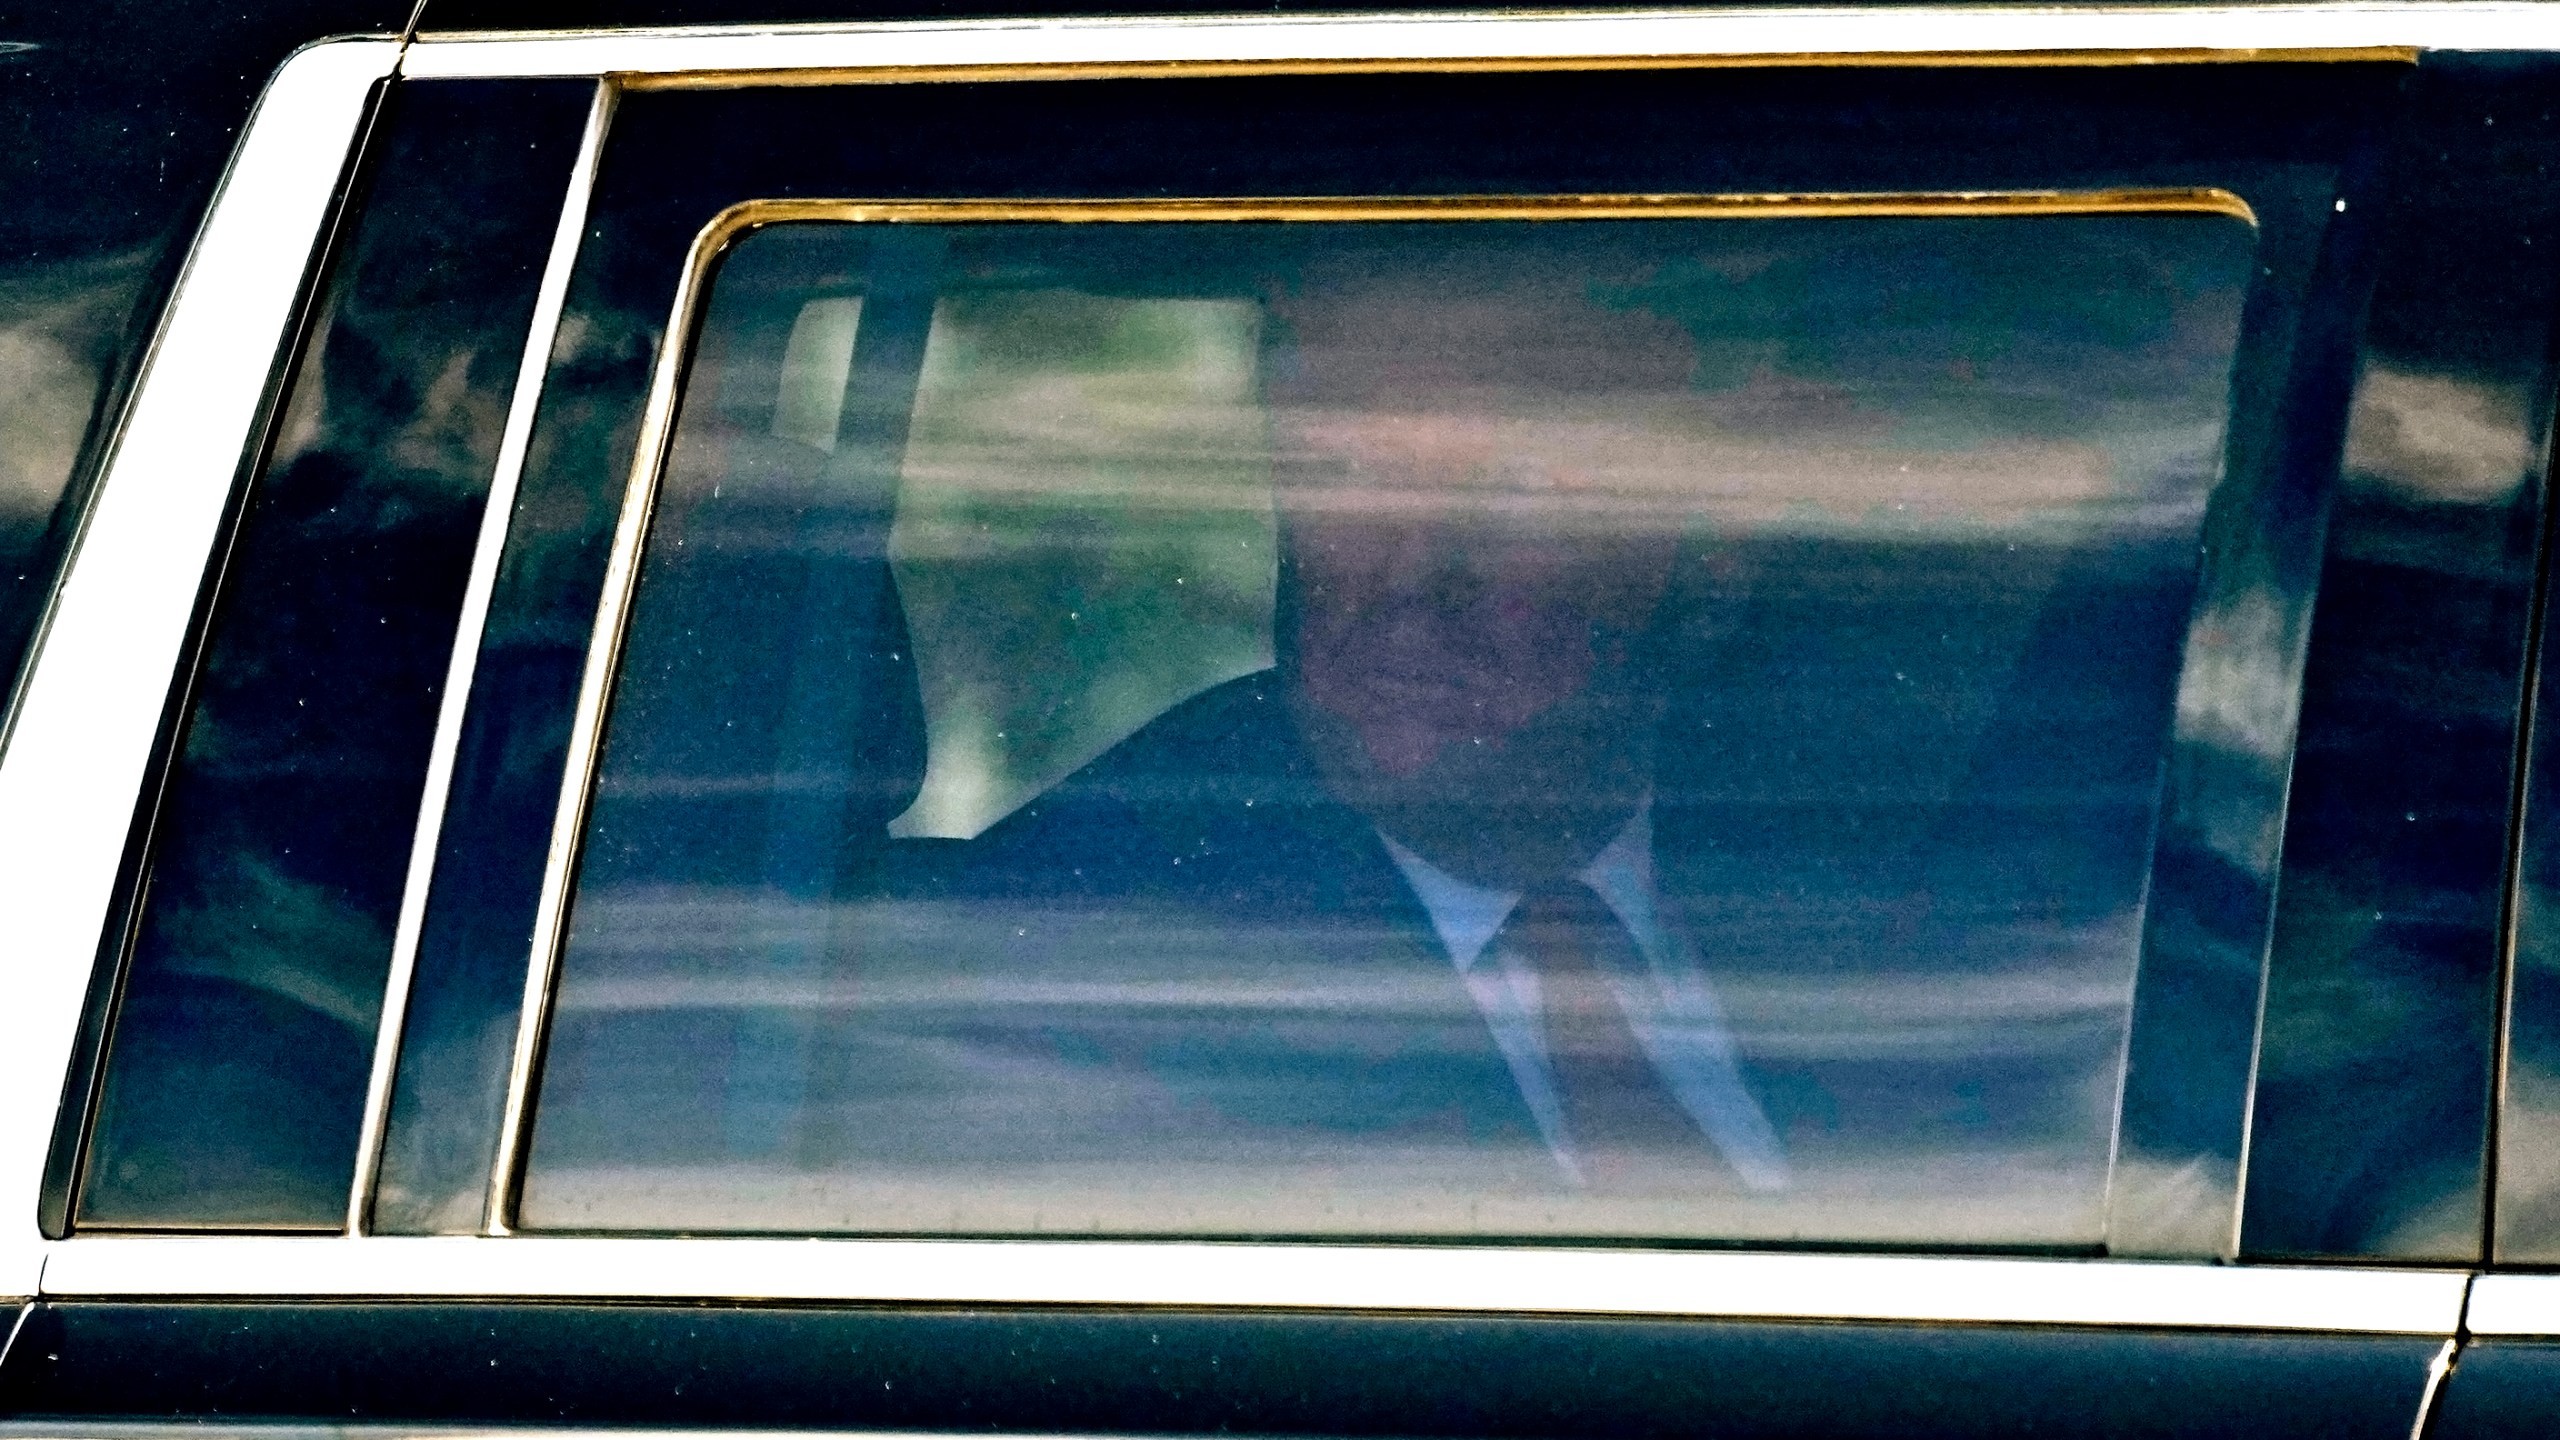 Former President Donald Trump waves to supporters as he leaves federal court, Thursday, March 14, 2024, in Fort Pierce, Fla. (AP Photo/Wilfredo Lee)